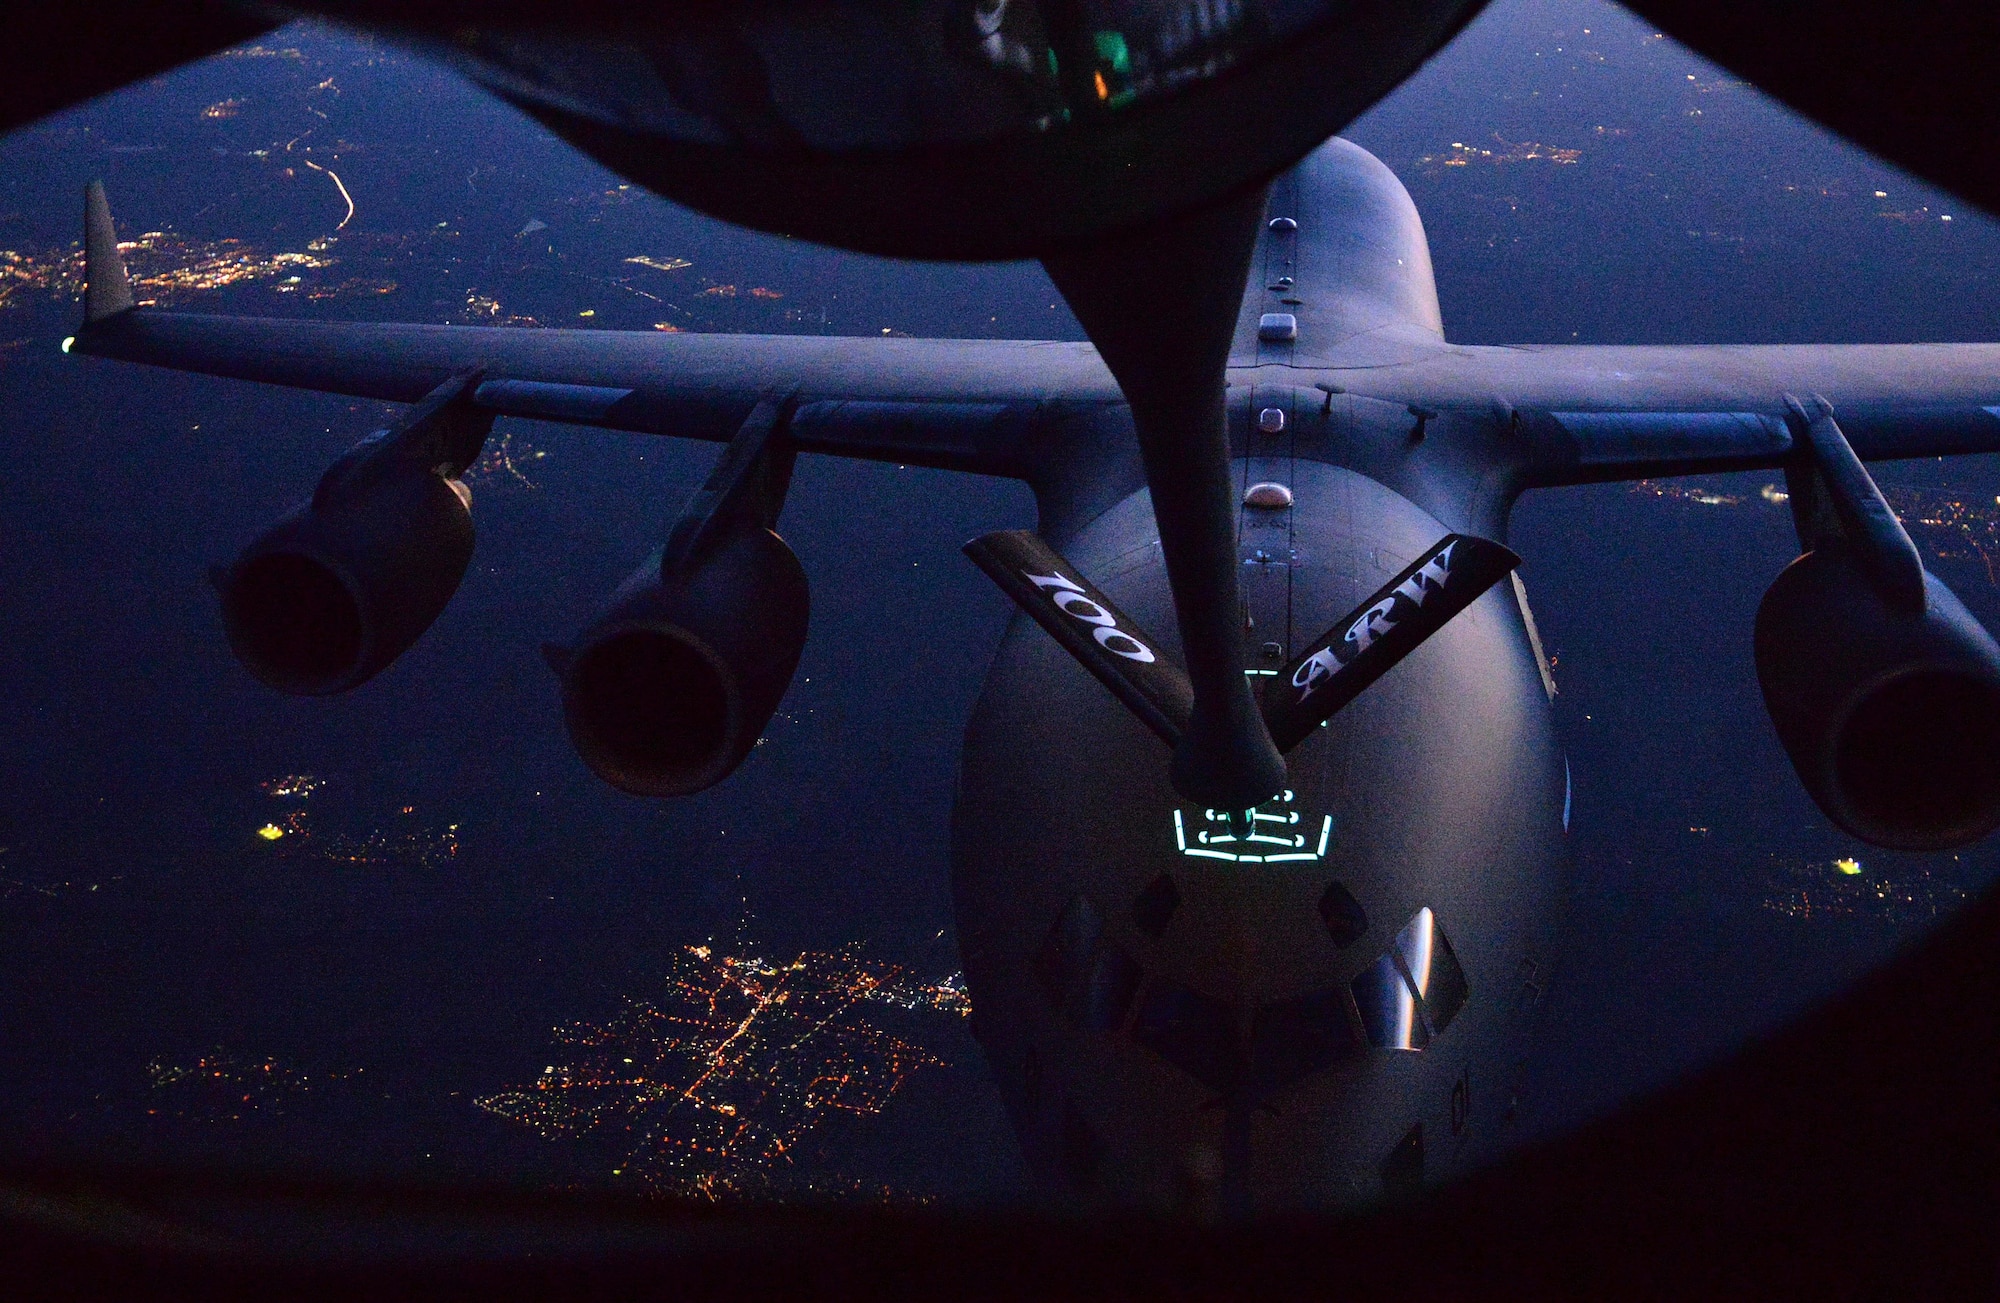 A U.S. Air Force KC-135 performs a dry contact with a C-17 Globemaster III during an aerial-refueling training exercise over Germany, Oct. 19, 2017. The training exercise was done in support of the Strategic Airlift Command operated out of Papa Air Base, Hungary. Strategic Airlift Command consists of 12 NATO and Partnership for Peace nations. (U.S. Air Force photo by Airman 1st Class Luke Milano)